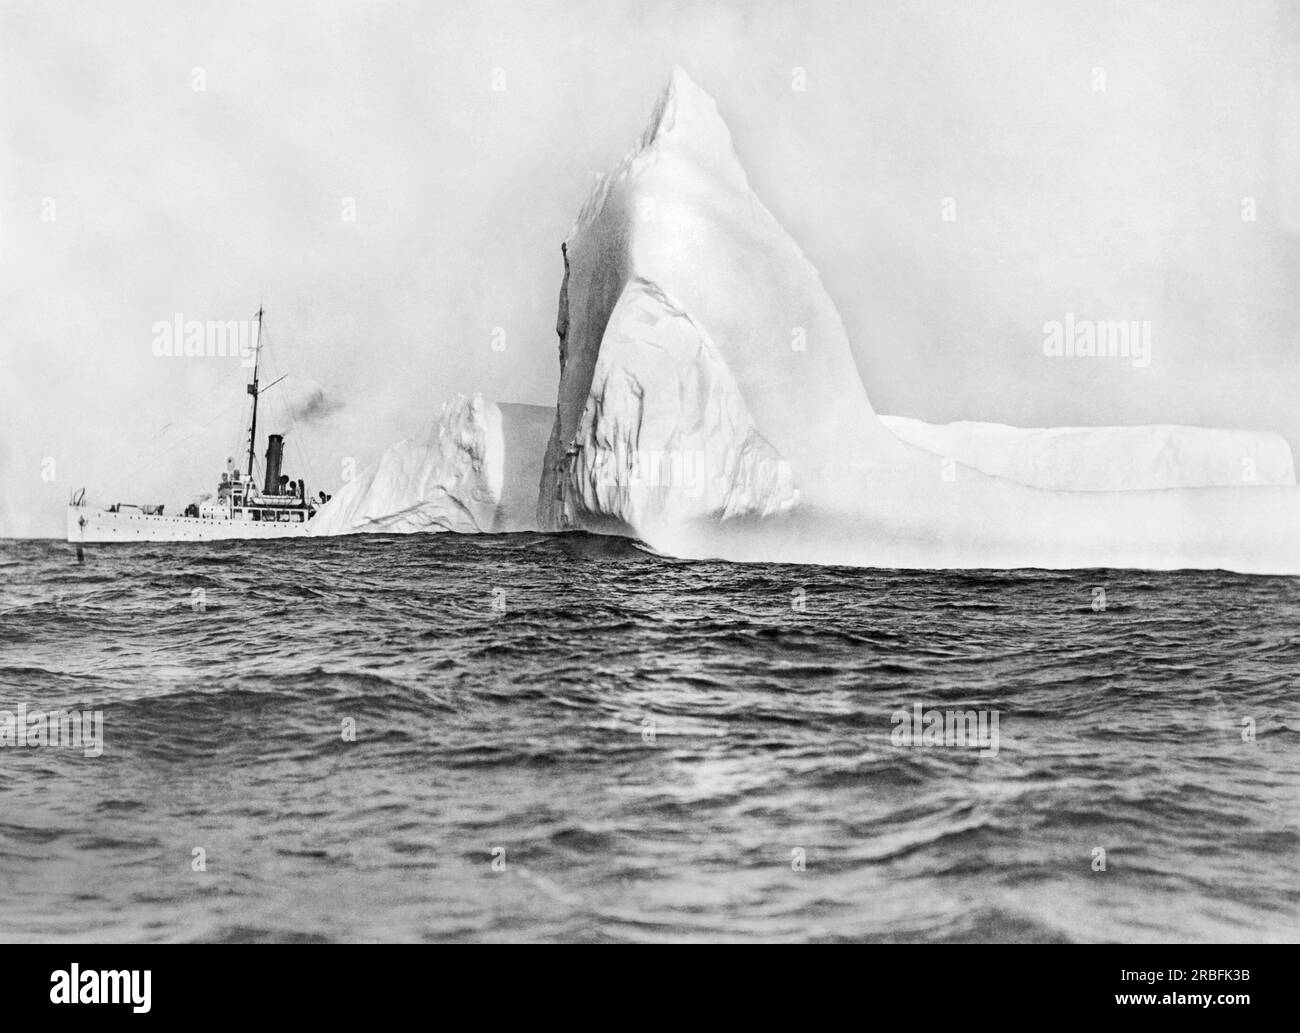 North Atlantic:  June 1, 1922 A U.S. Coast Guard cutter on patrol for icebergs in the steamship lanes of the North Atlantic. Their location is charted and broadcast to the various ships passing through. This work was instituted after the Titanic disaster. Stock Photo